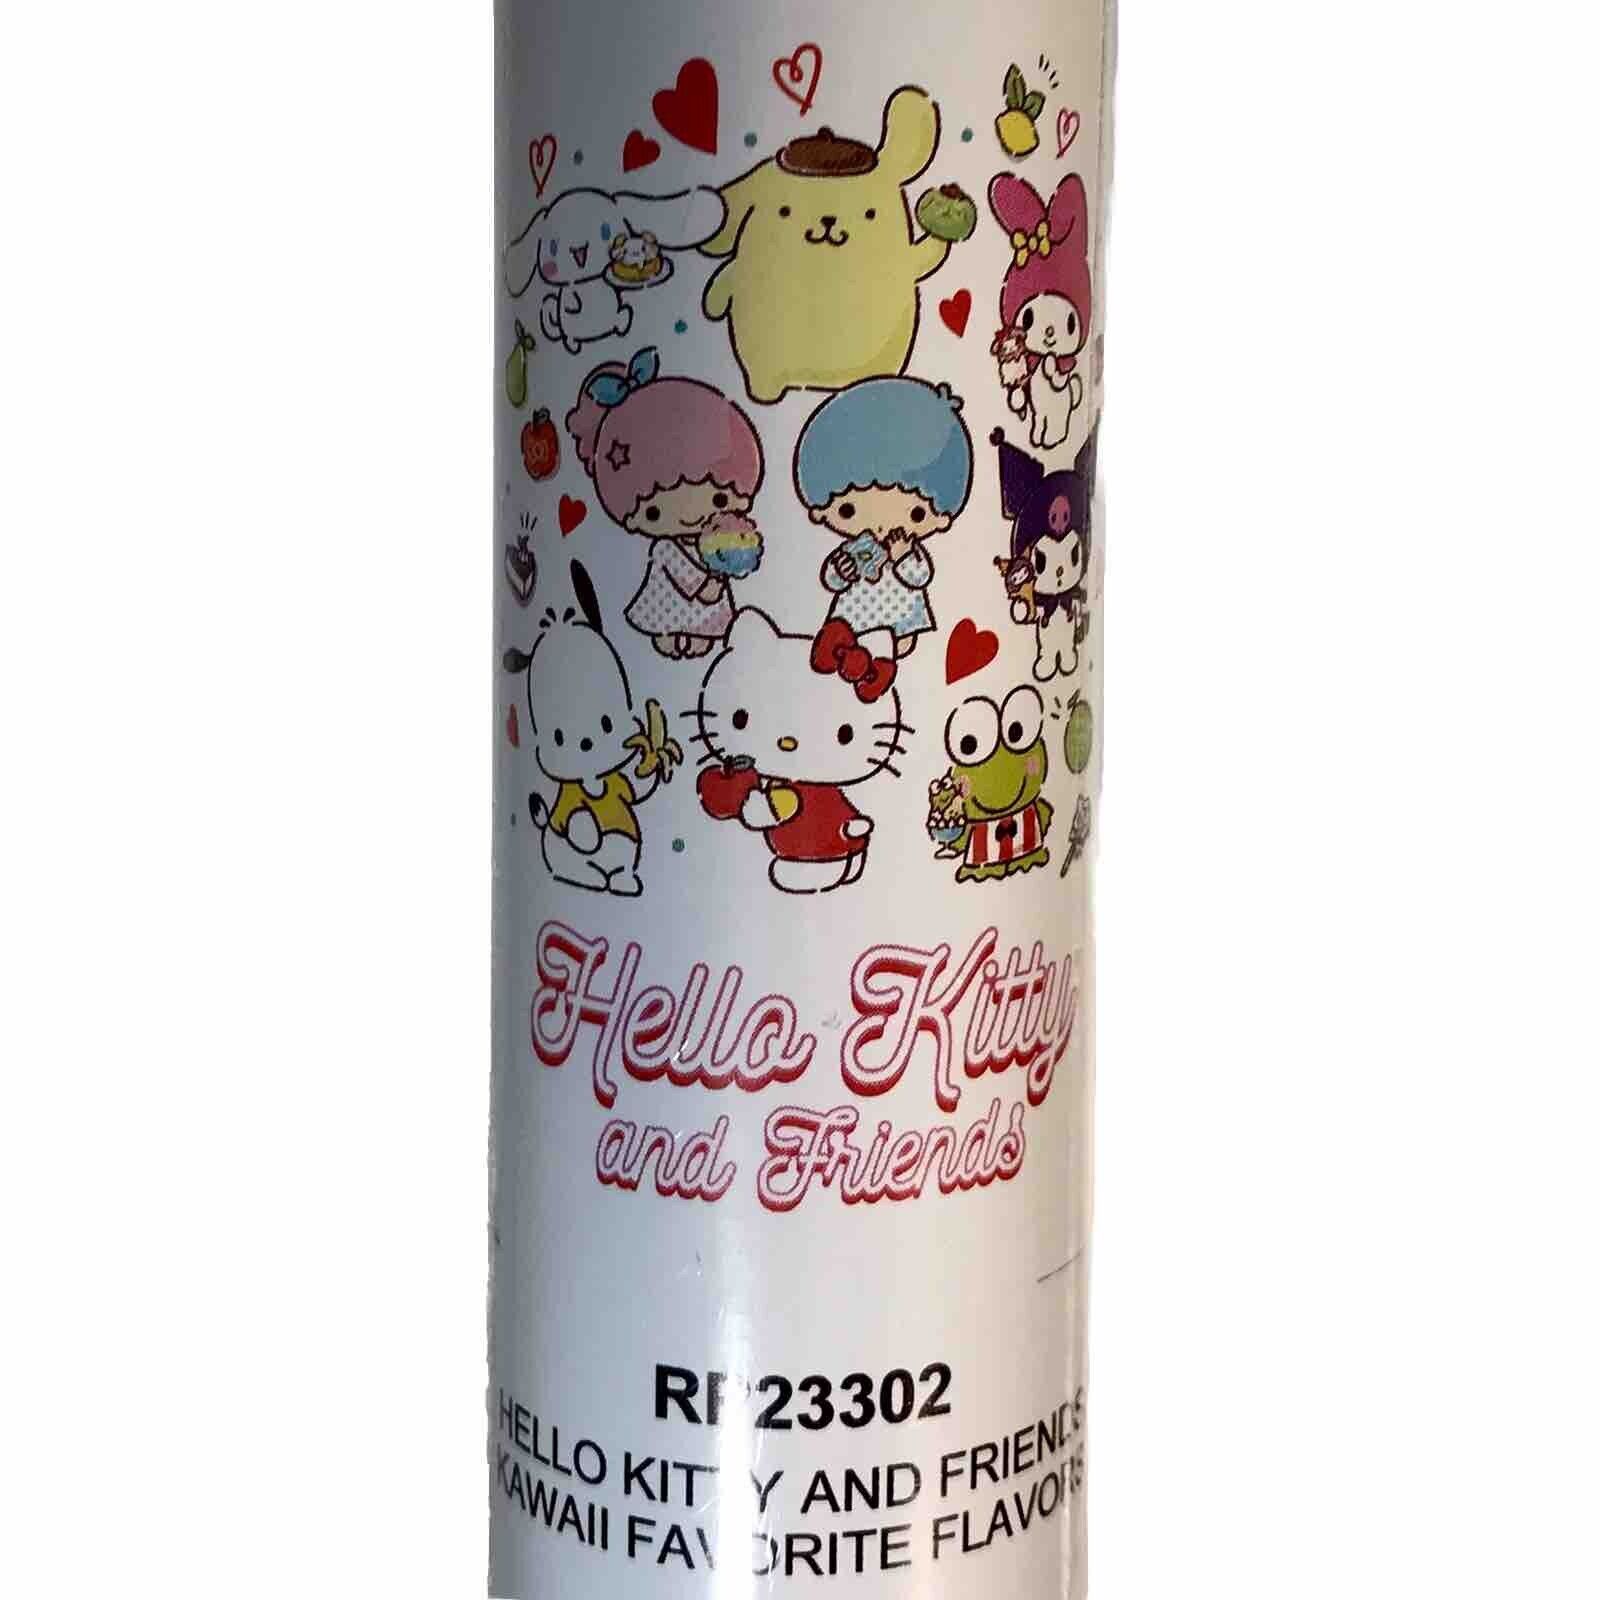 Sanrio Hello Kitty Kawaii Favorite Flavors Wall Poster New Sealed 22 x 34 in